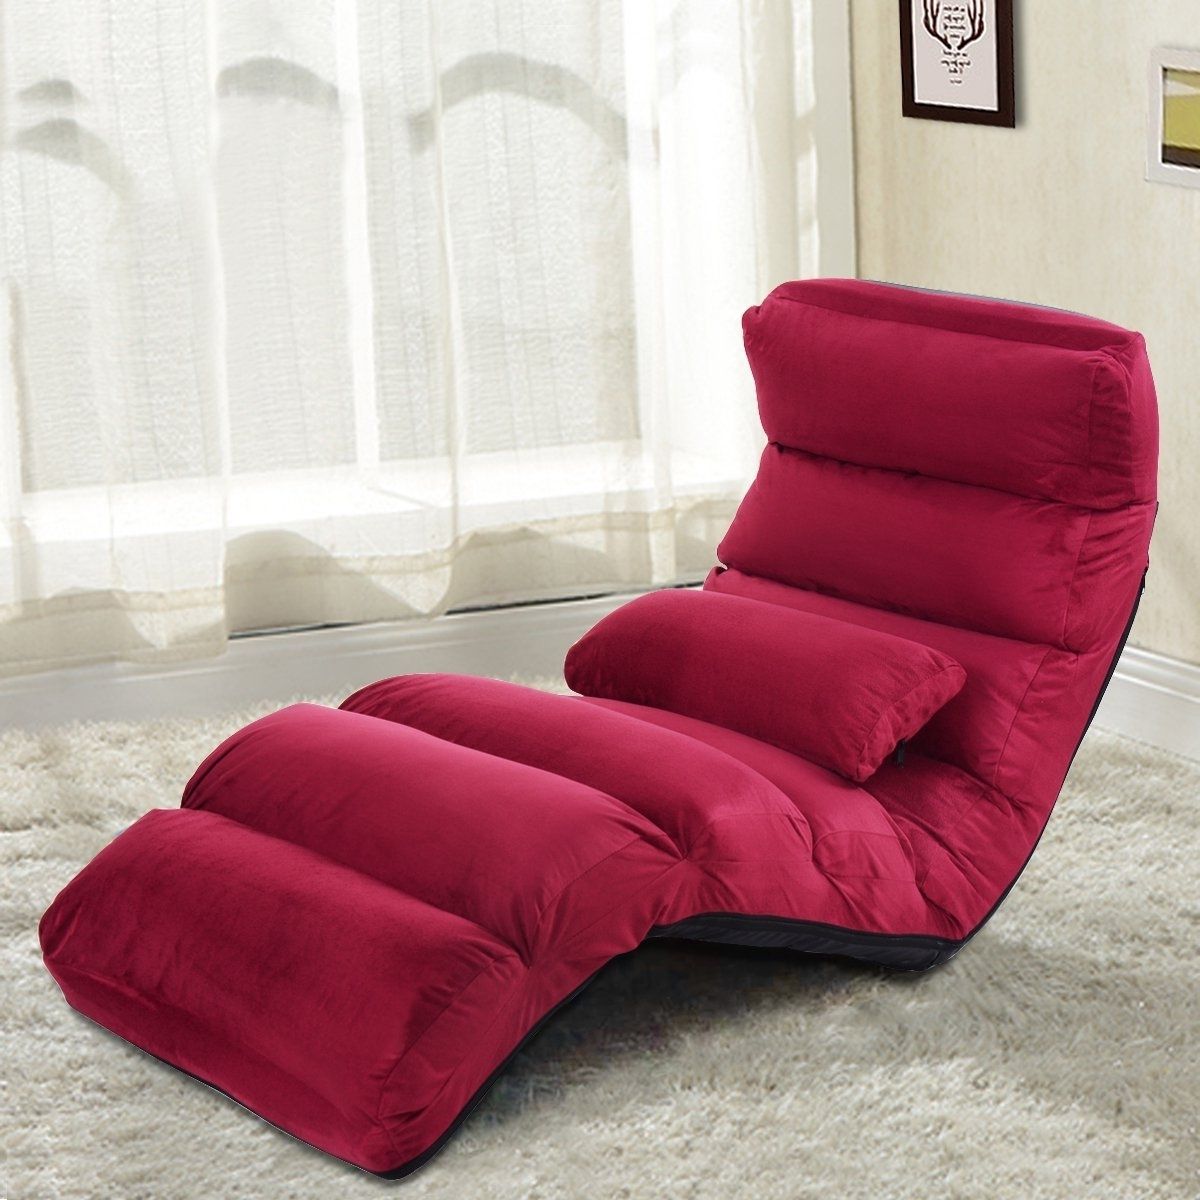 Lazy Sofa Chairs Inside Most Popular Amazon: Giantex Folding Lazy Sofa Chair Stylish Sofa Couch (View 1 of 15)